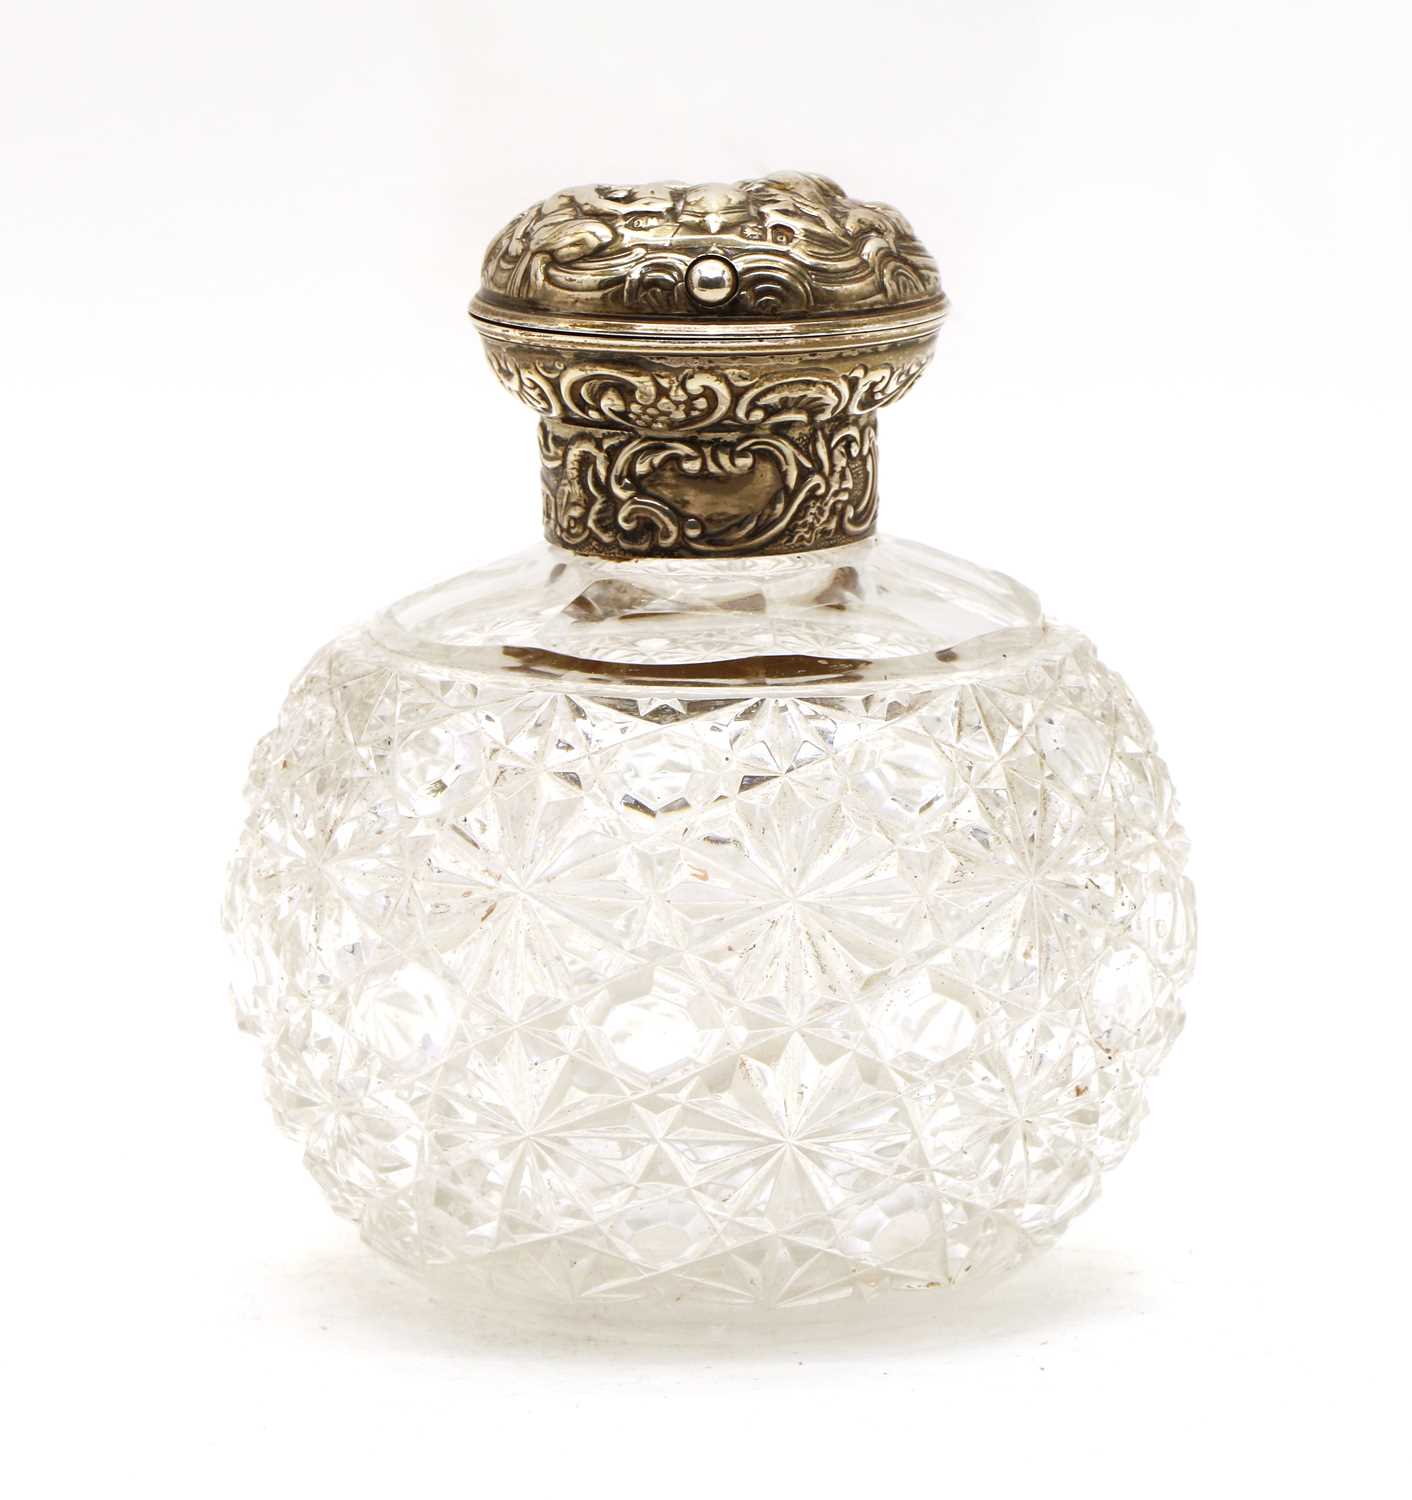 Lot 26 - A William Commyns silver topped cut glass perfume bottle